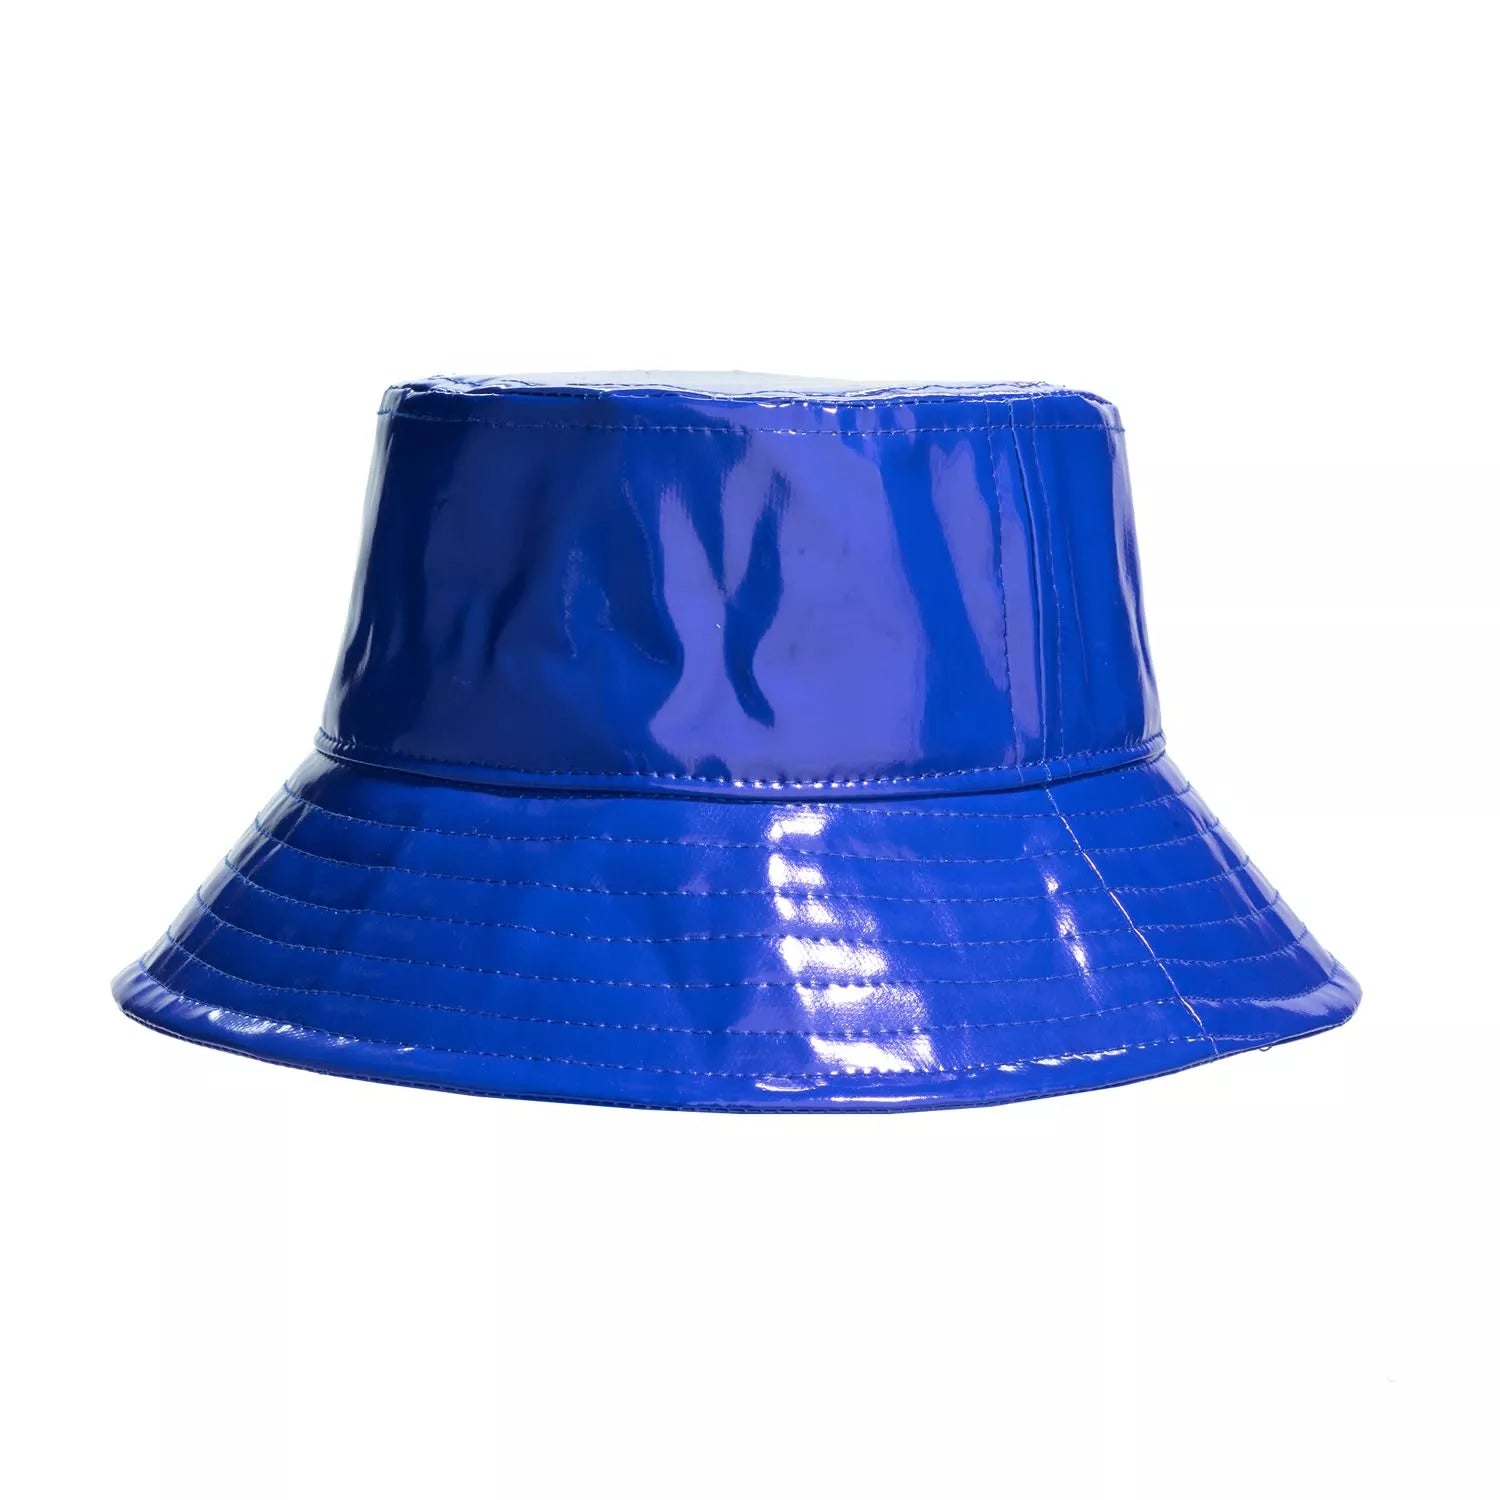 Make A Bold Statement With Laird Hatters' Exclusive Vinyl Bucket Hat